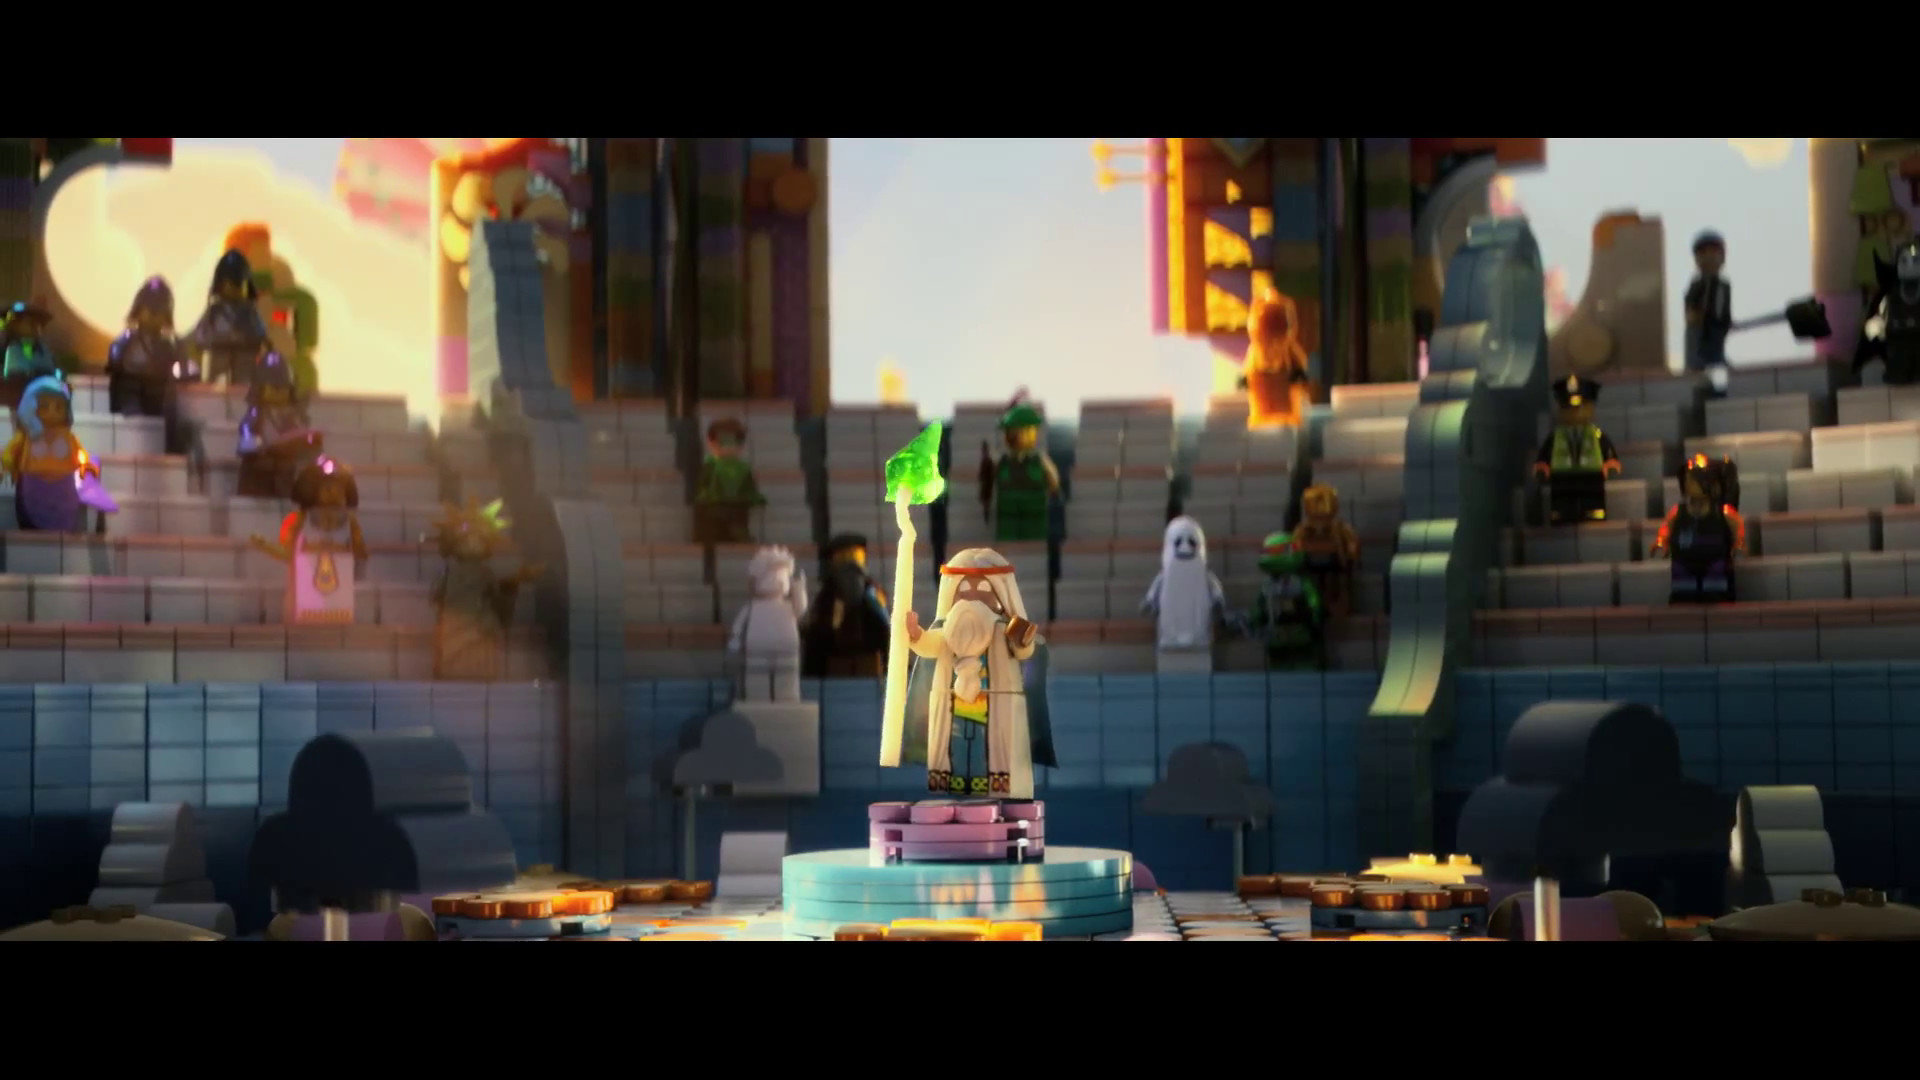 Best The Lego Movie wallpaper ID:26462 for High Resolution 1080p computer